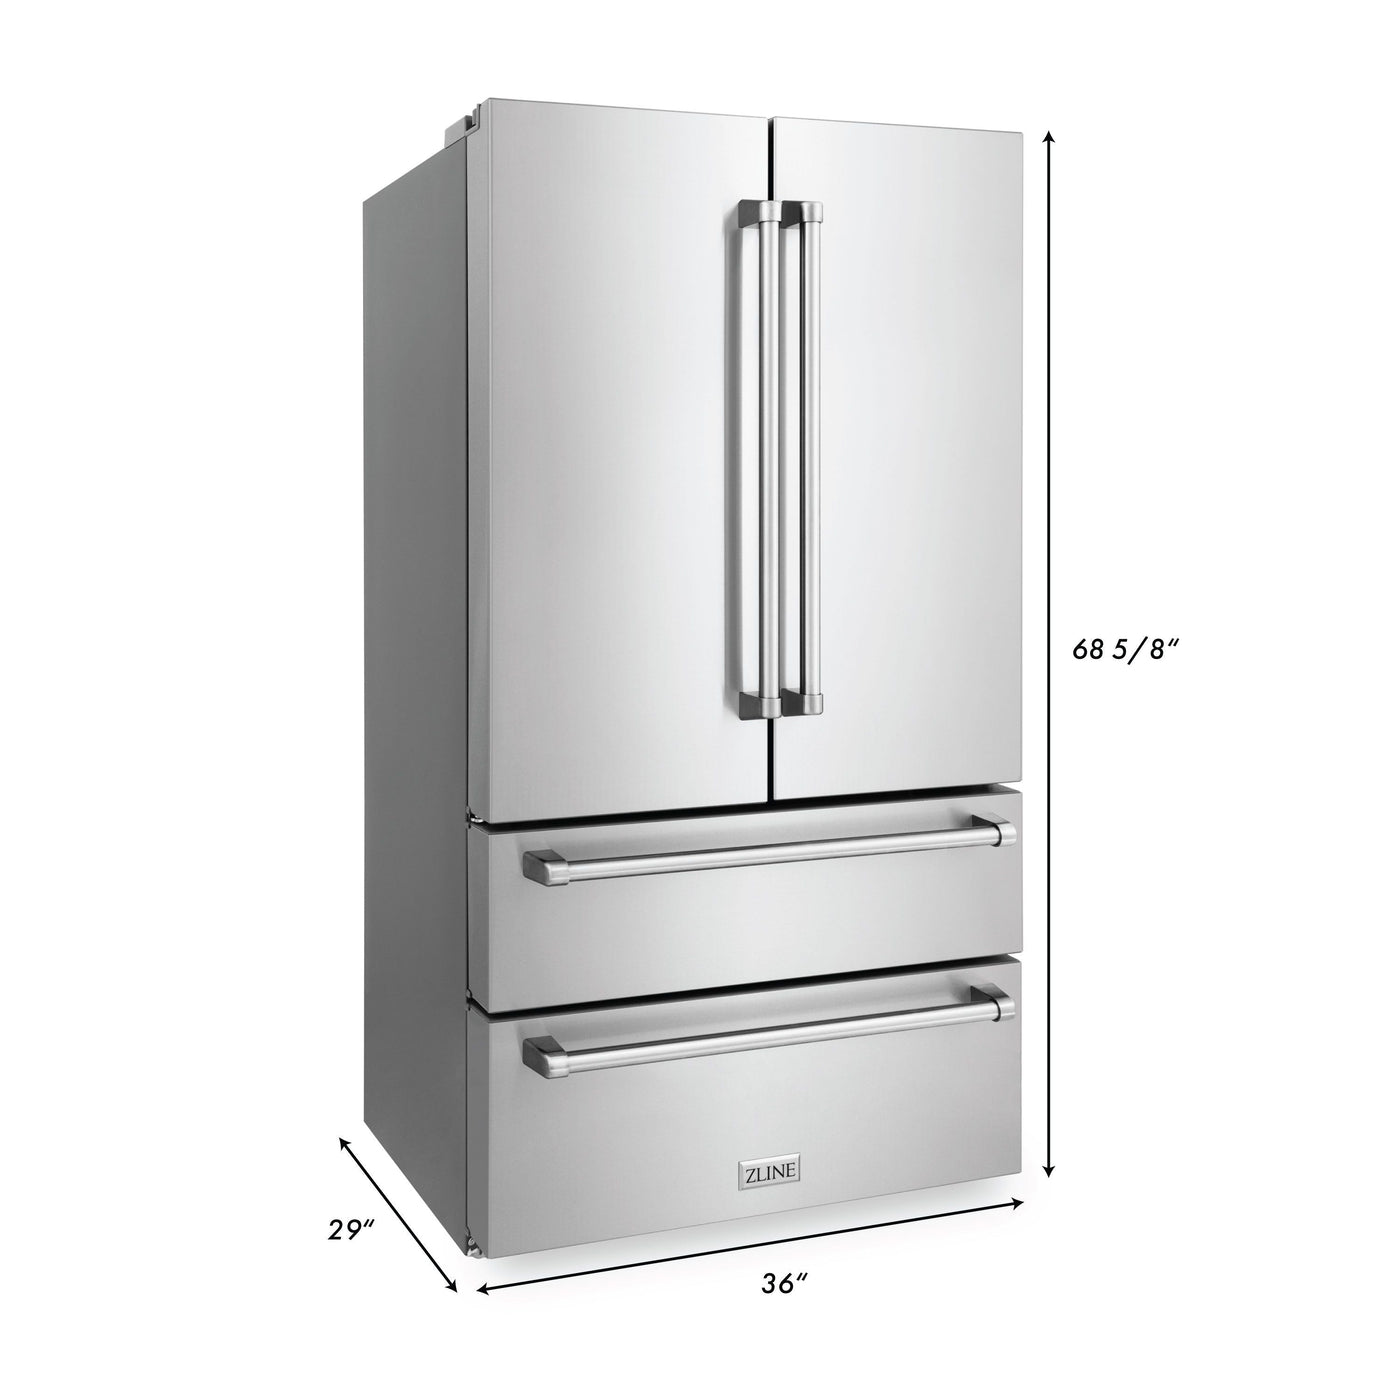 ZLINE Kitchen Package with Refrigeration, 30" Stainless Steel Gas Range, 30" Range Hood, Microwave Drawer, and 24" Tall Tub Dishwasher